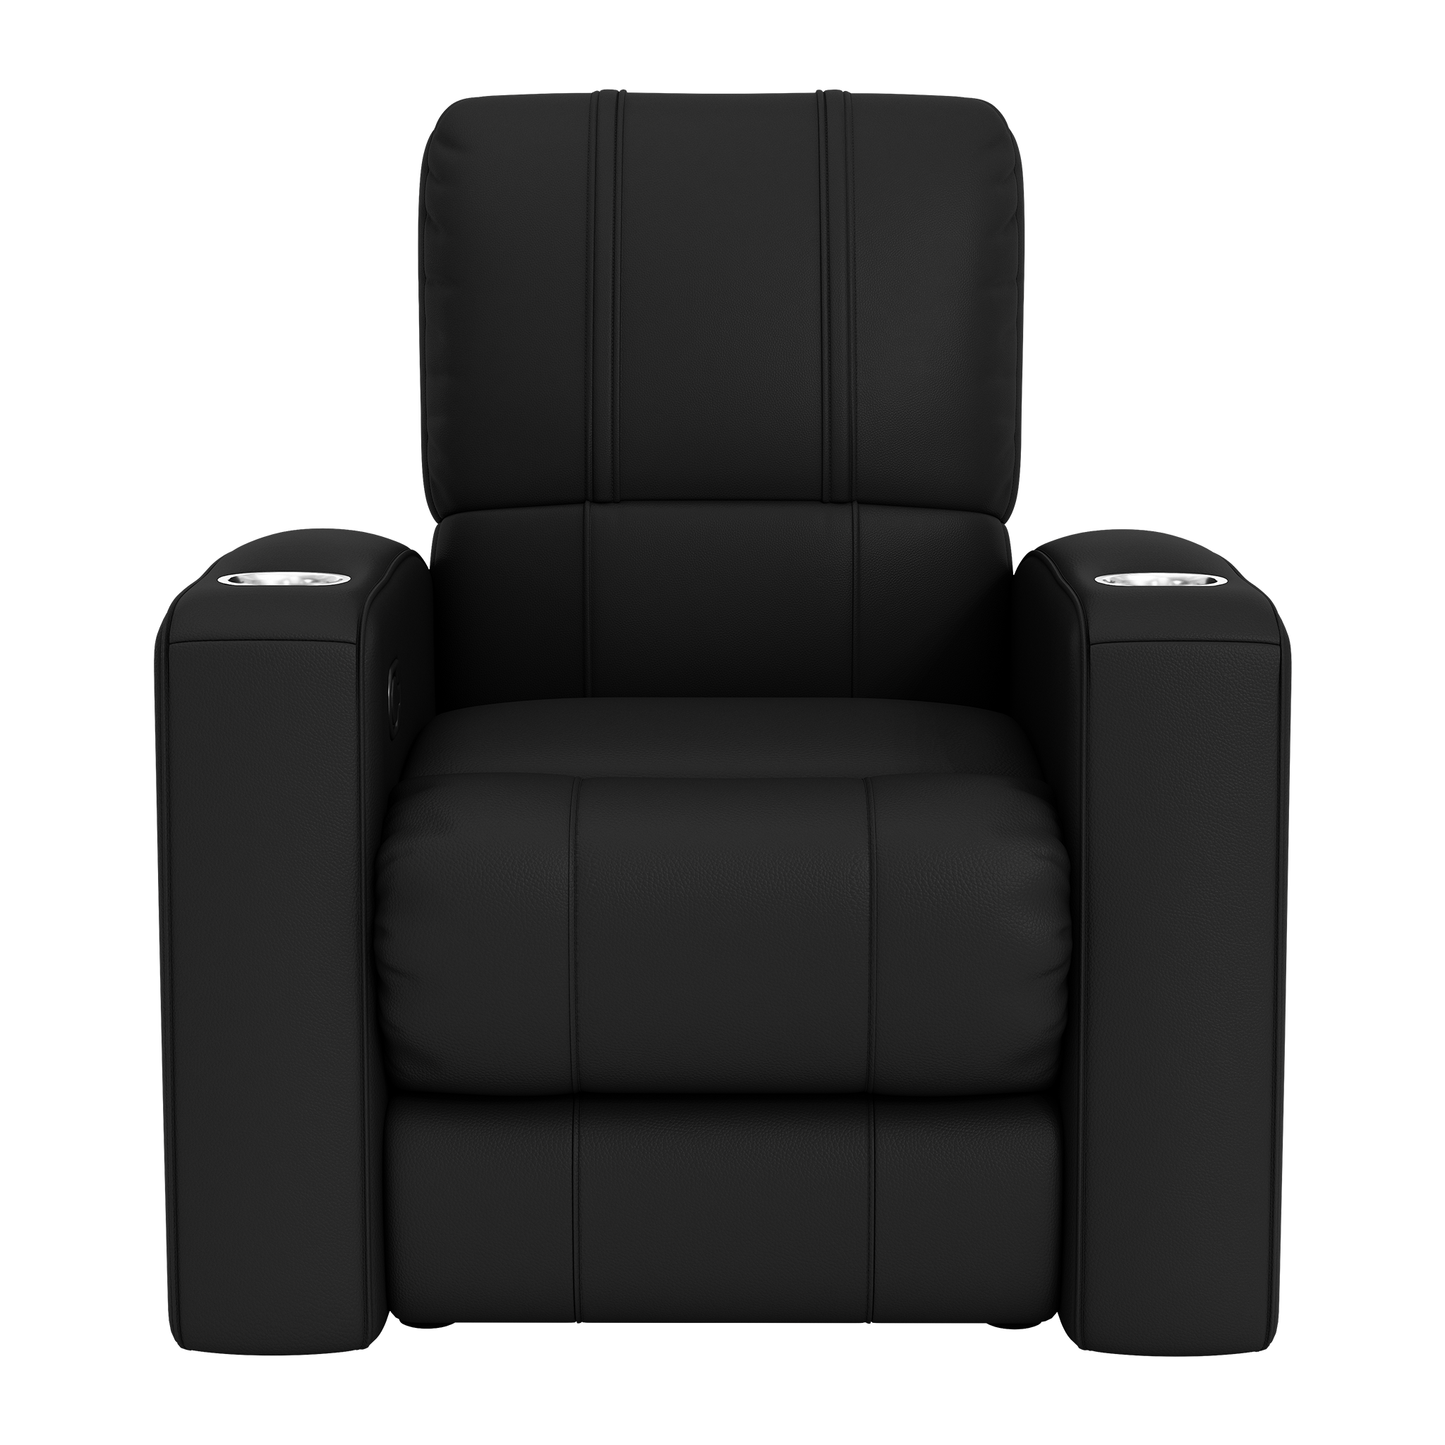 Relax Home Theater Recliner with Ghoulish Rising Hand Halloween Logo